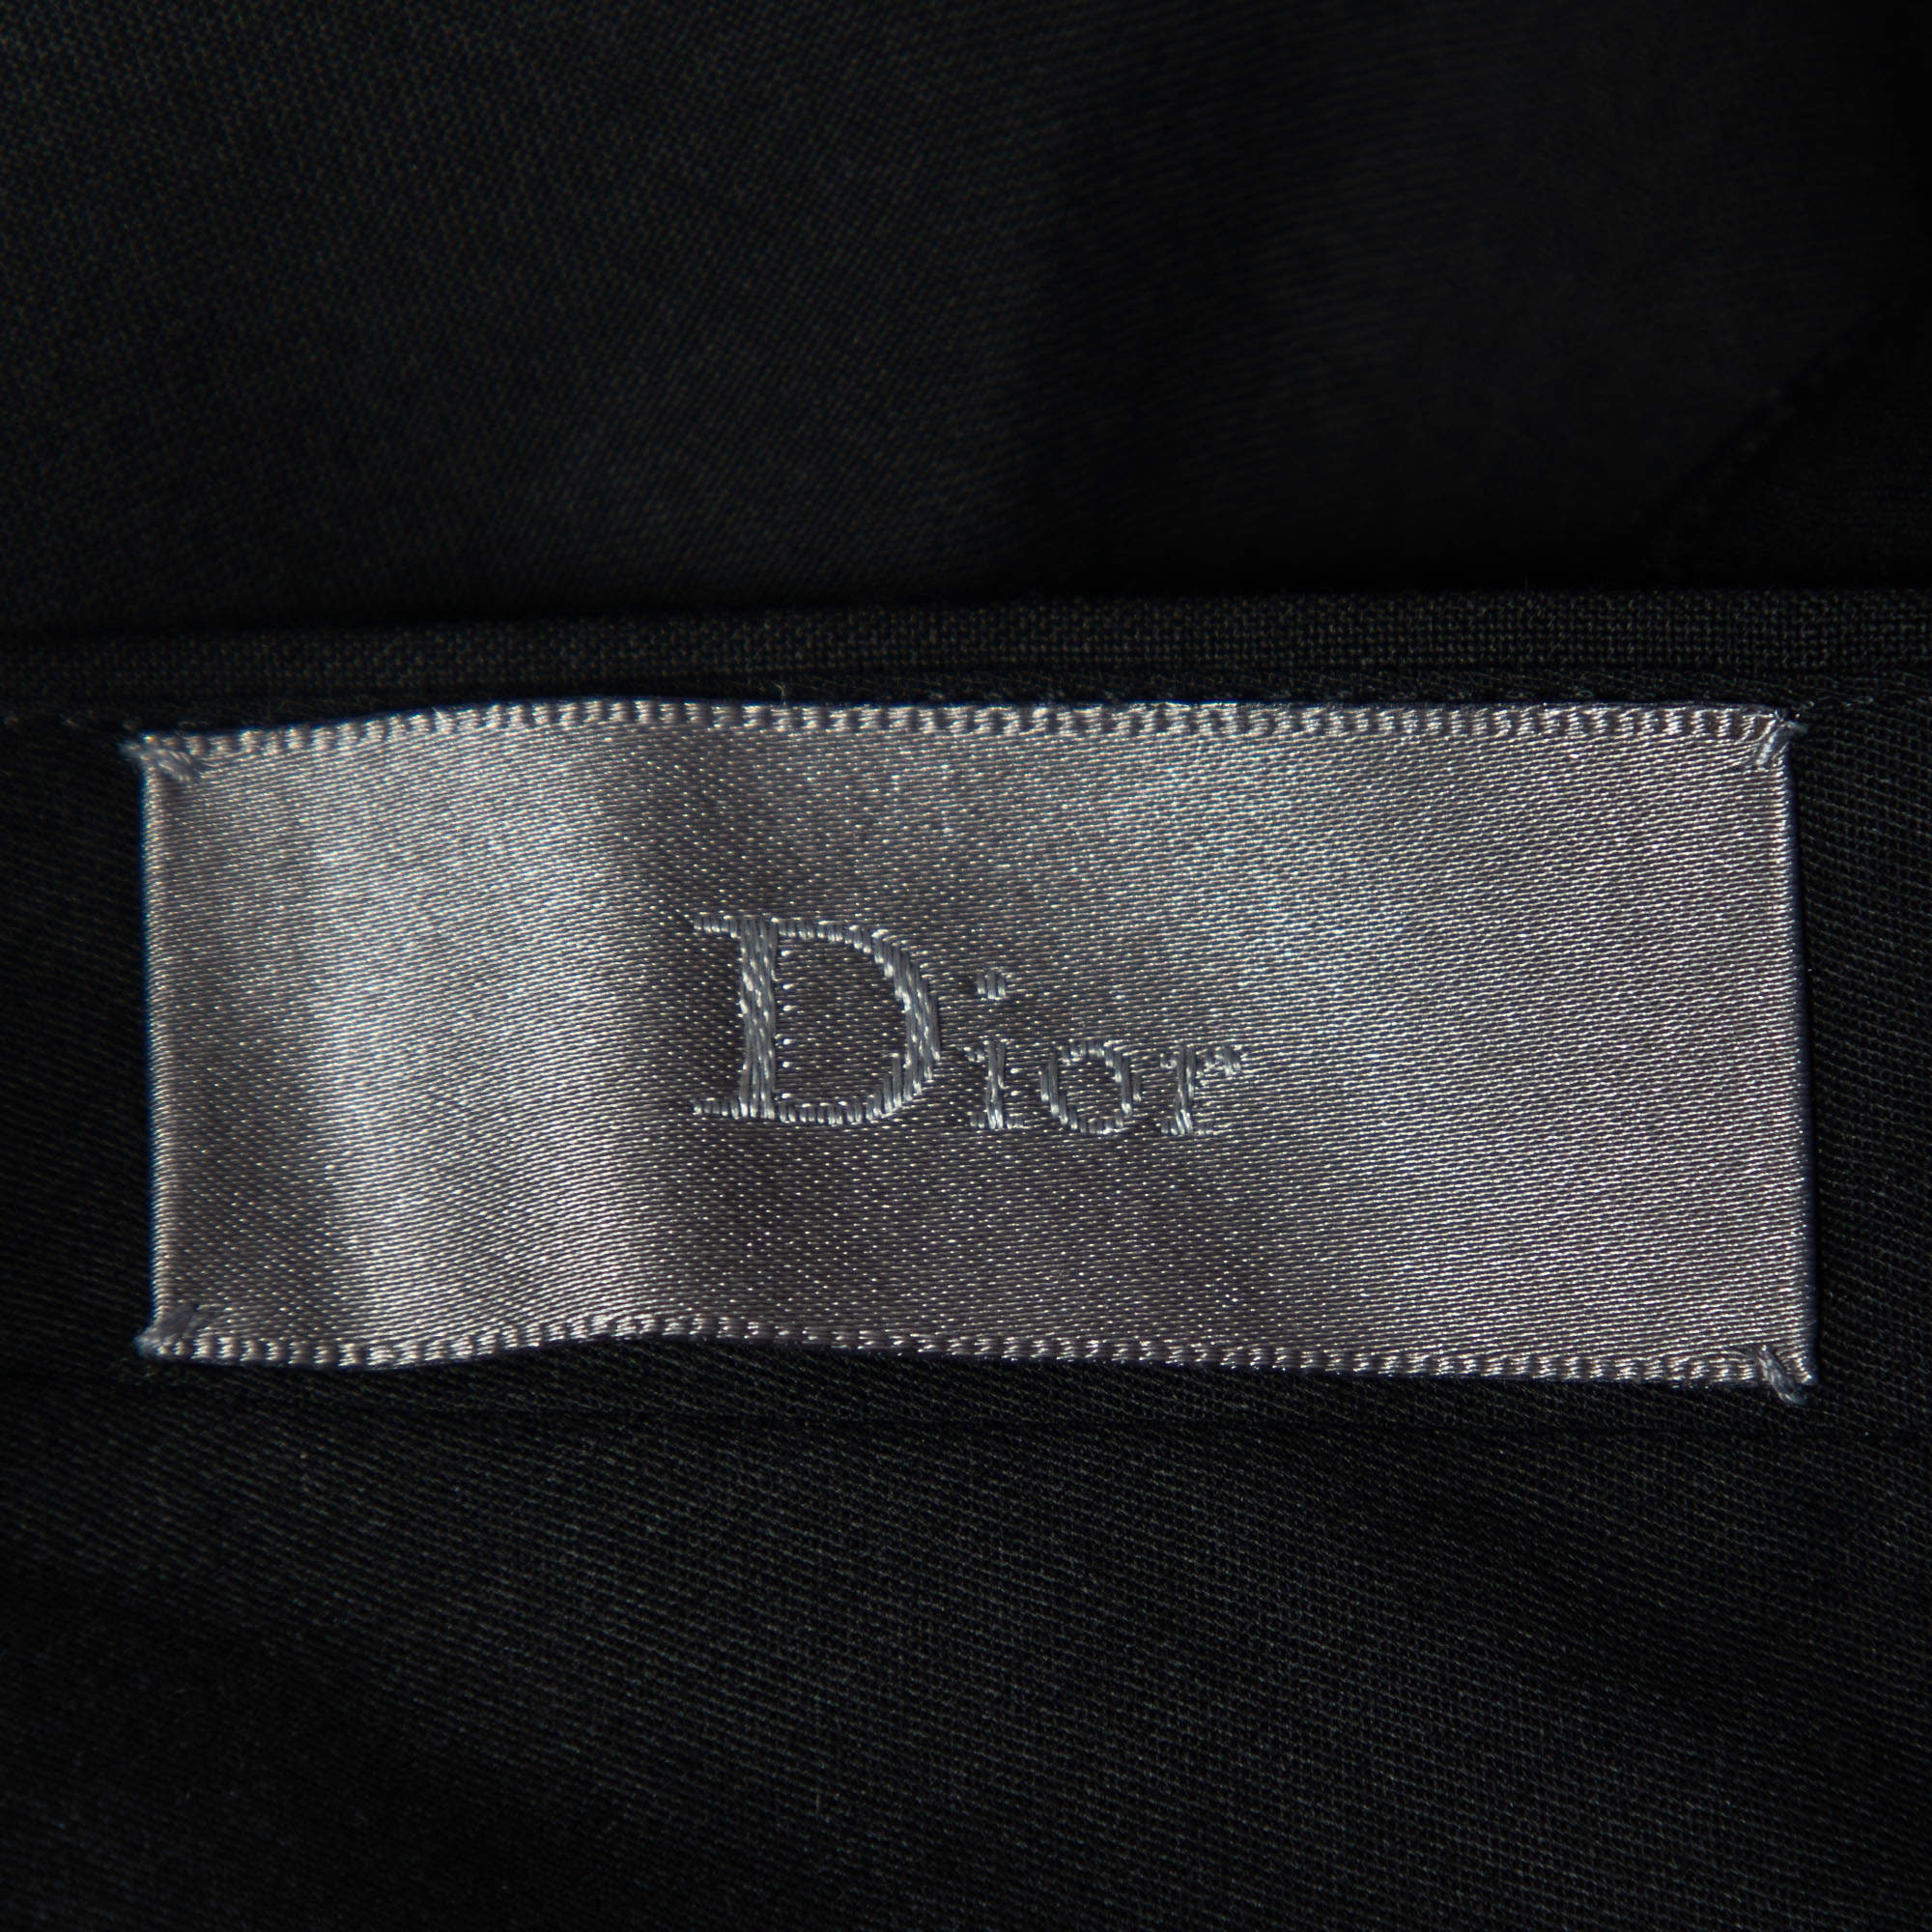 Dior Homme Black Wool Drop 10 Tailored Trousers M Dior Homme